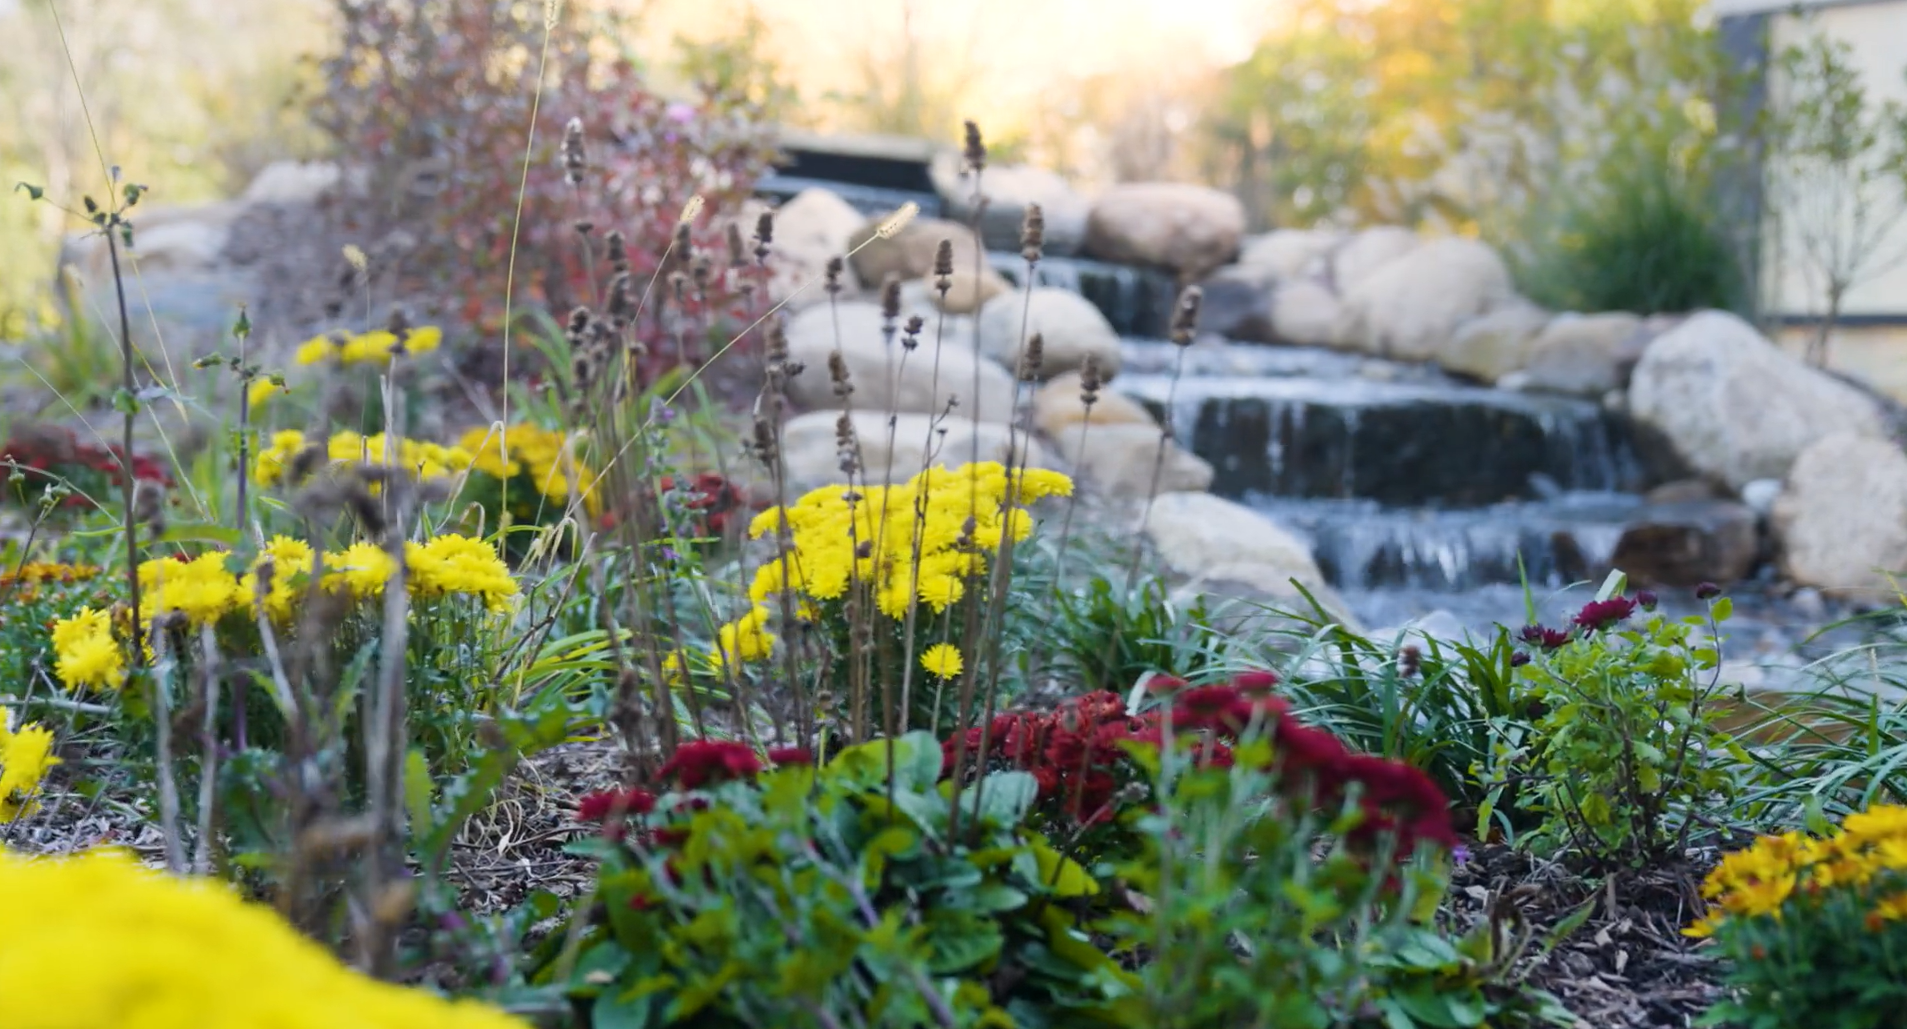 The thoughtfully designed Brightview Wayne fountain with landscaping based around native/local plantings. Yellow flowers and local shrubbery sit in front of a gently running waterfall style fountain.